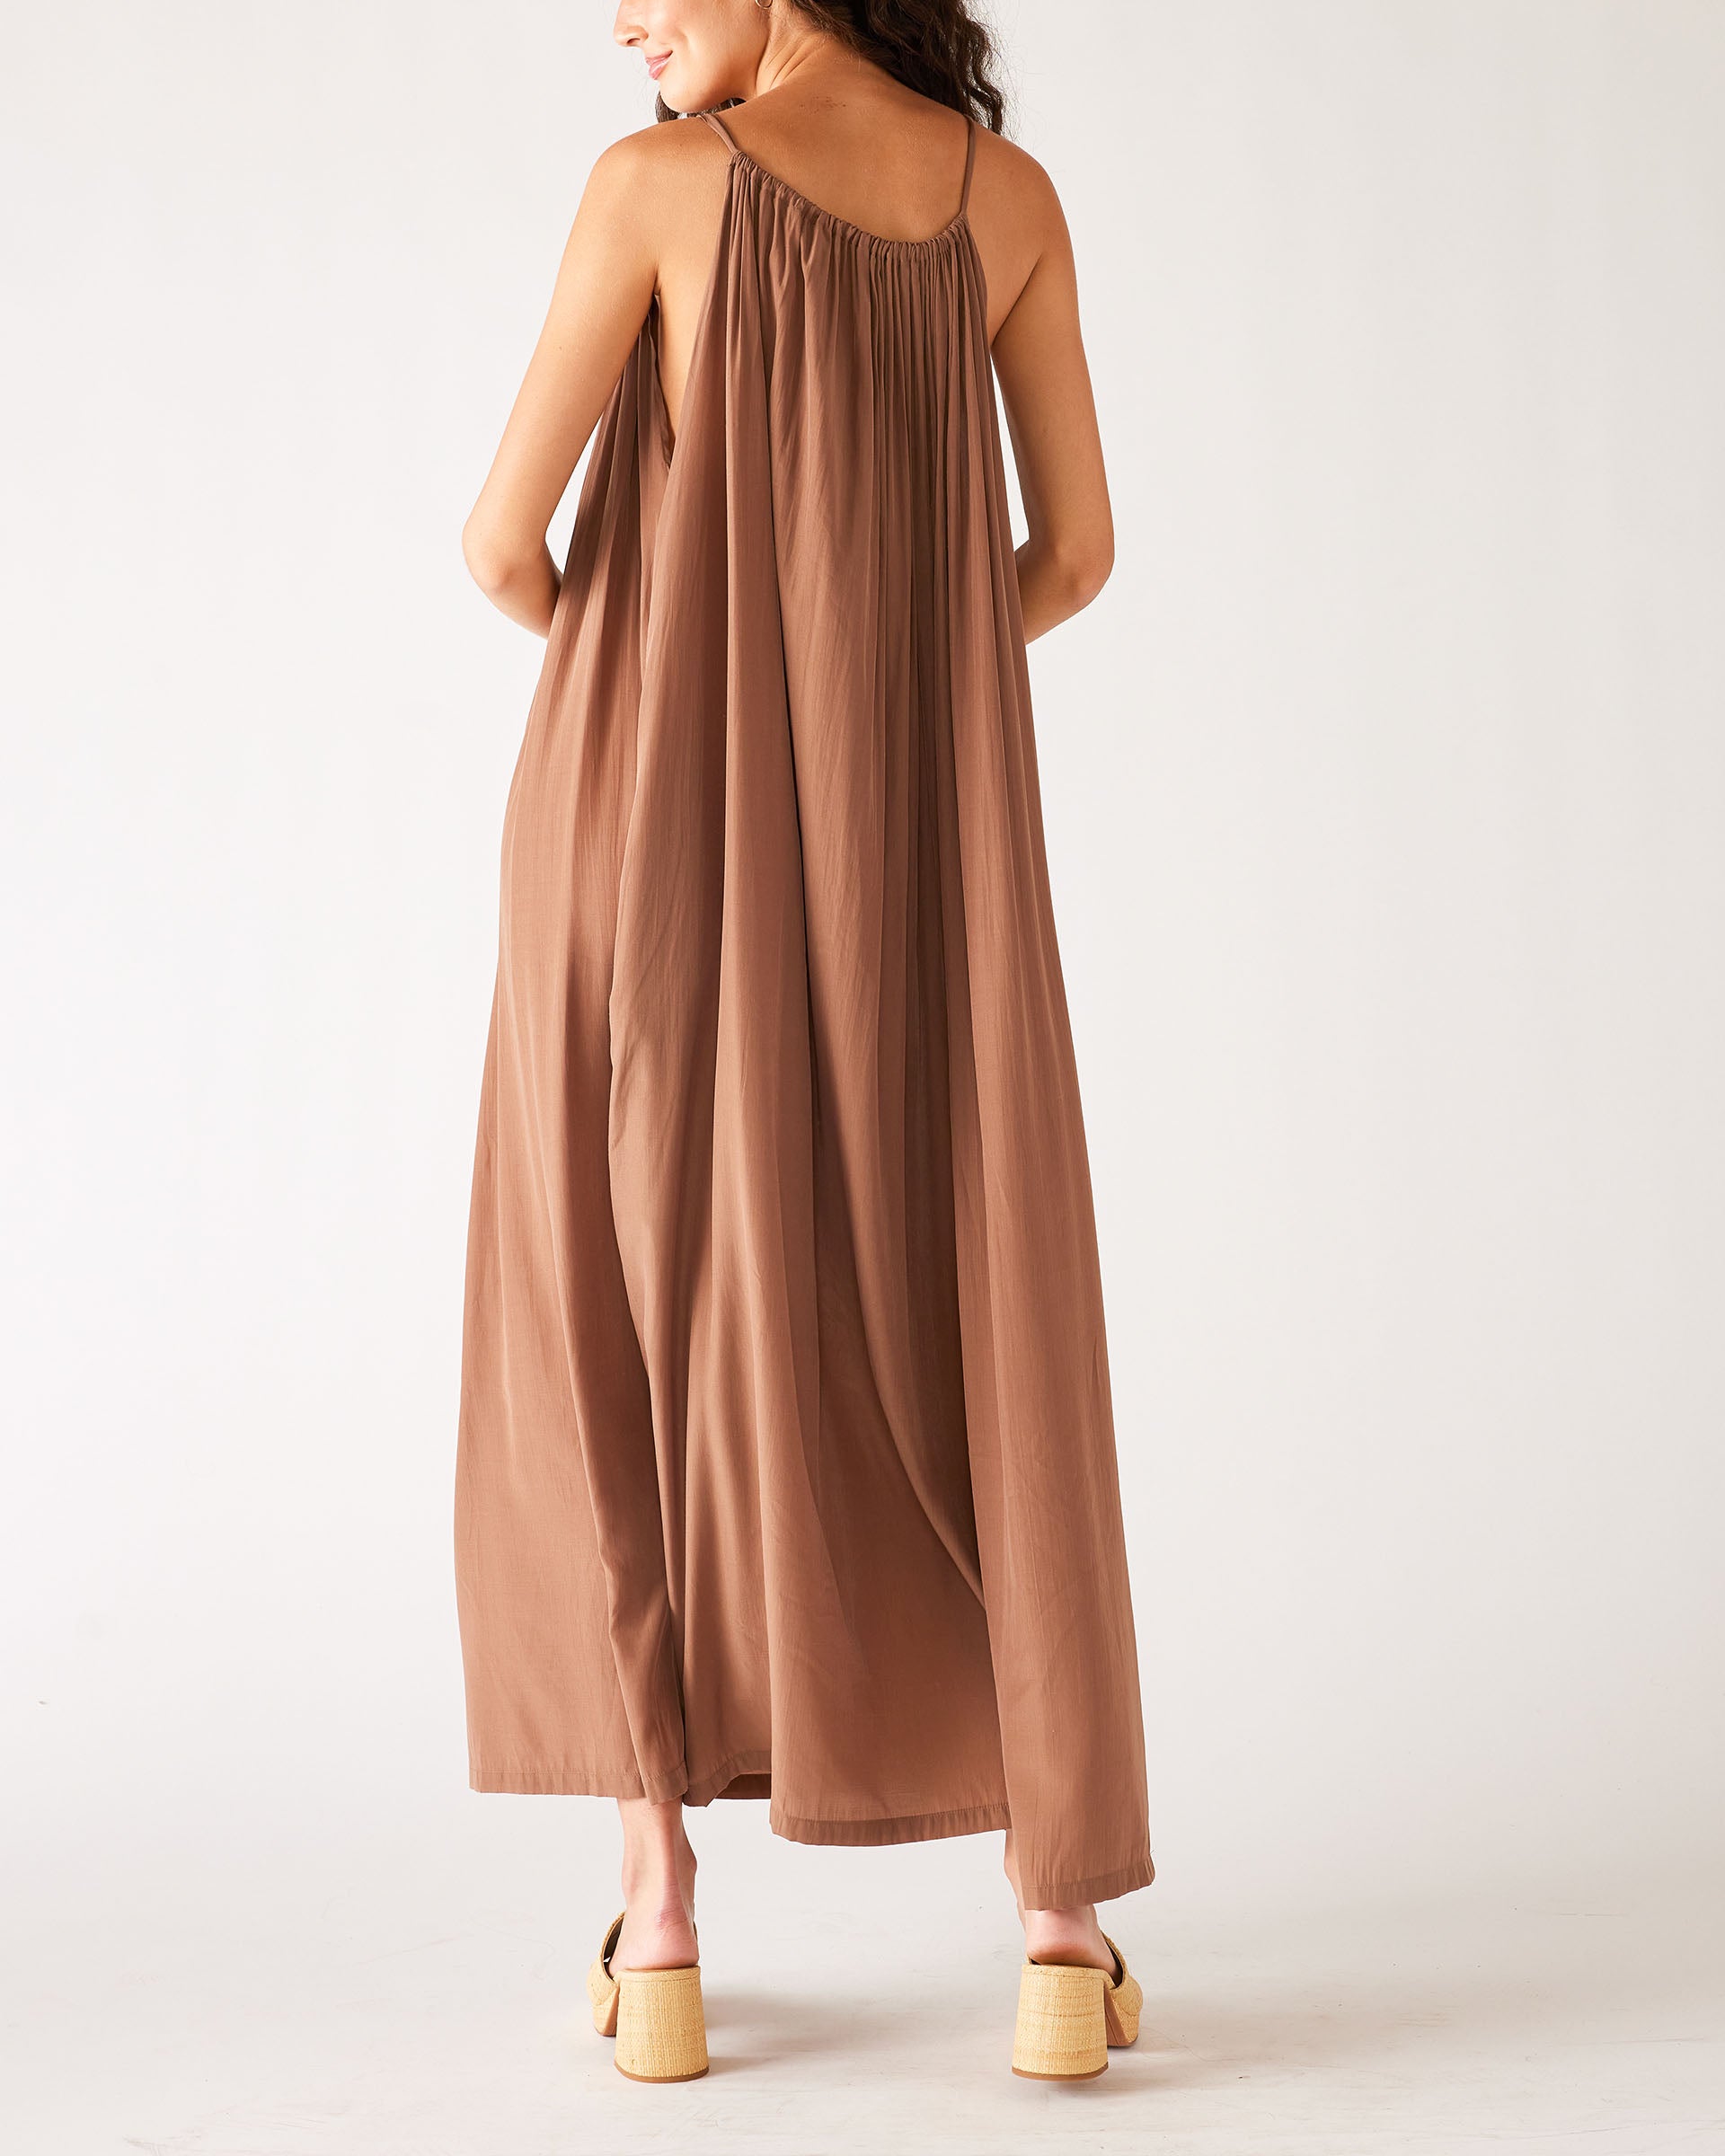 Women's Light Brown Loose Fit Pullover Maxi Dress Full Body Rear View 